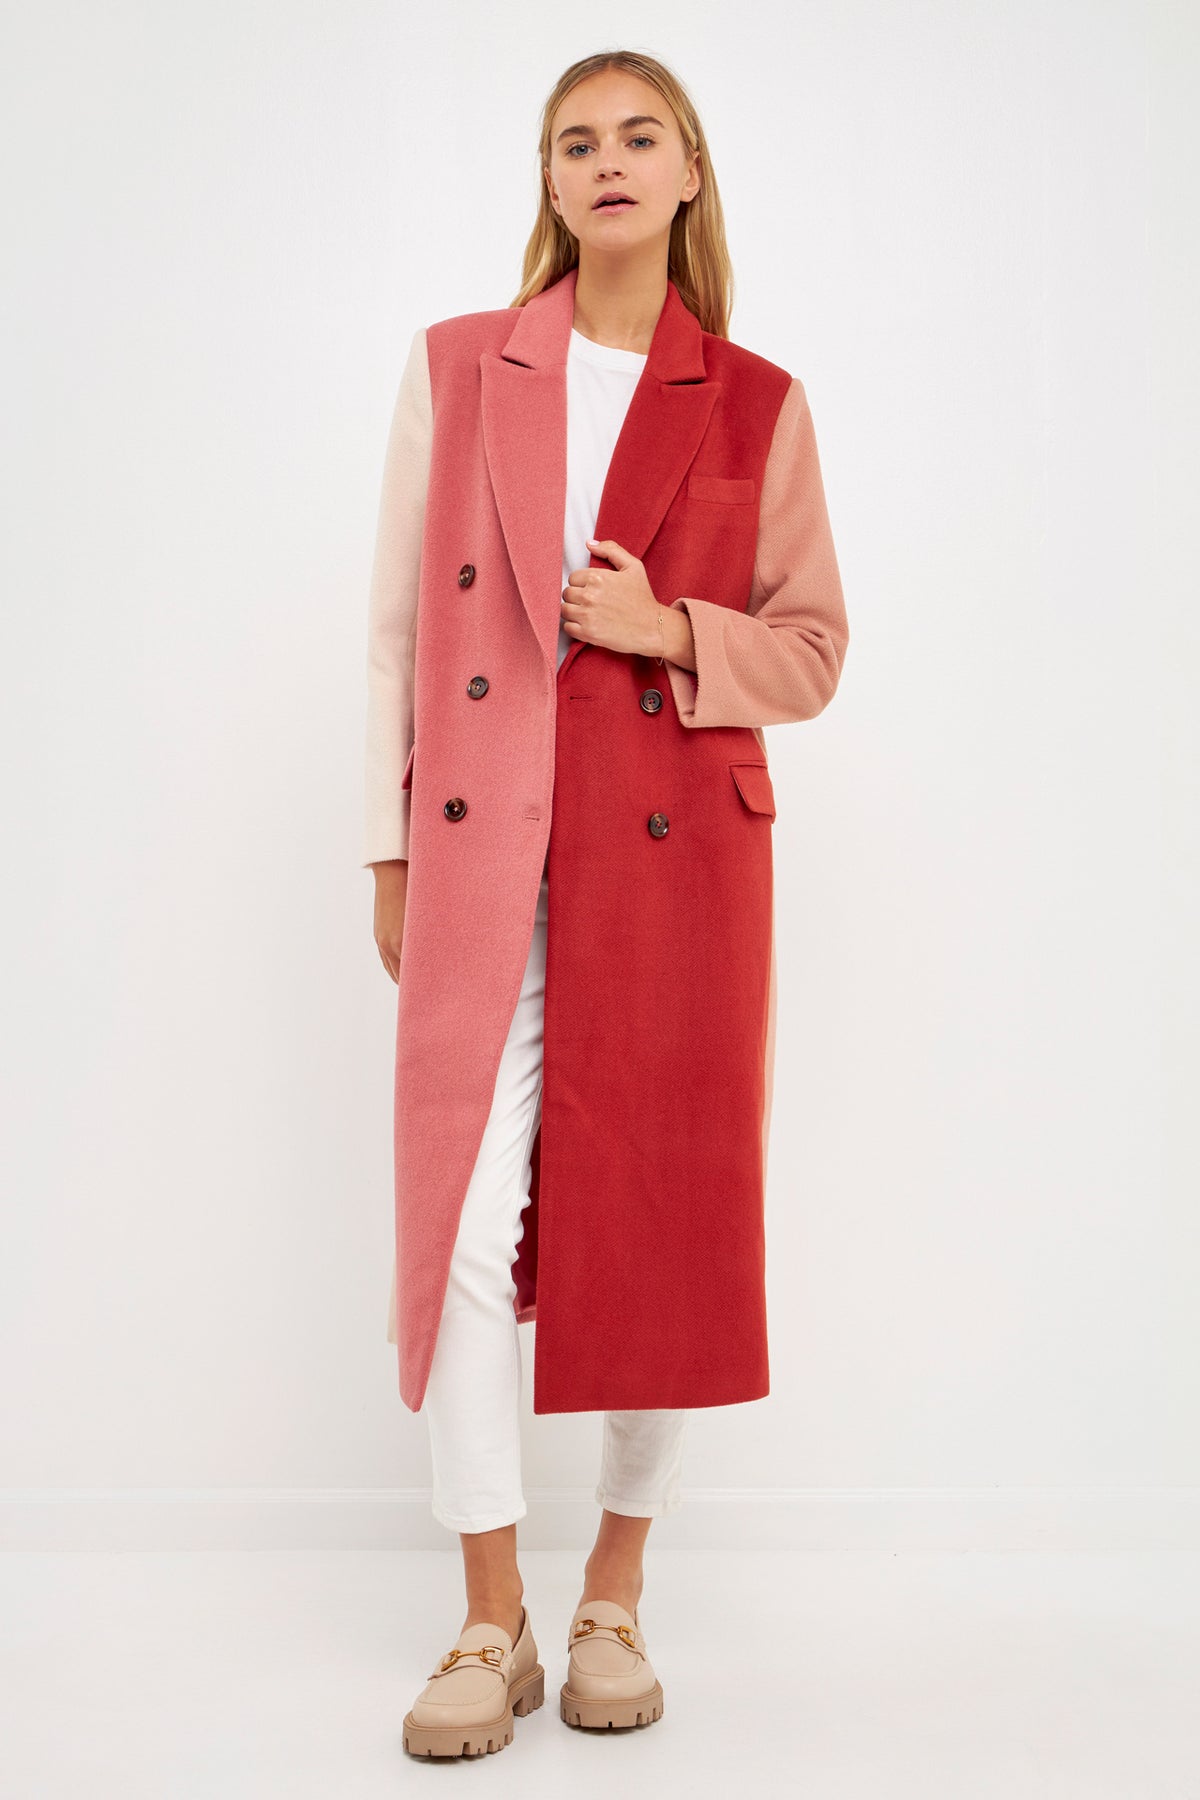 ENGLISH FACTORY - Colorblock Double-Breasted Coat - COATS available at Objectrare